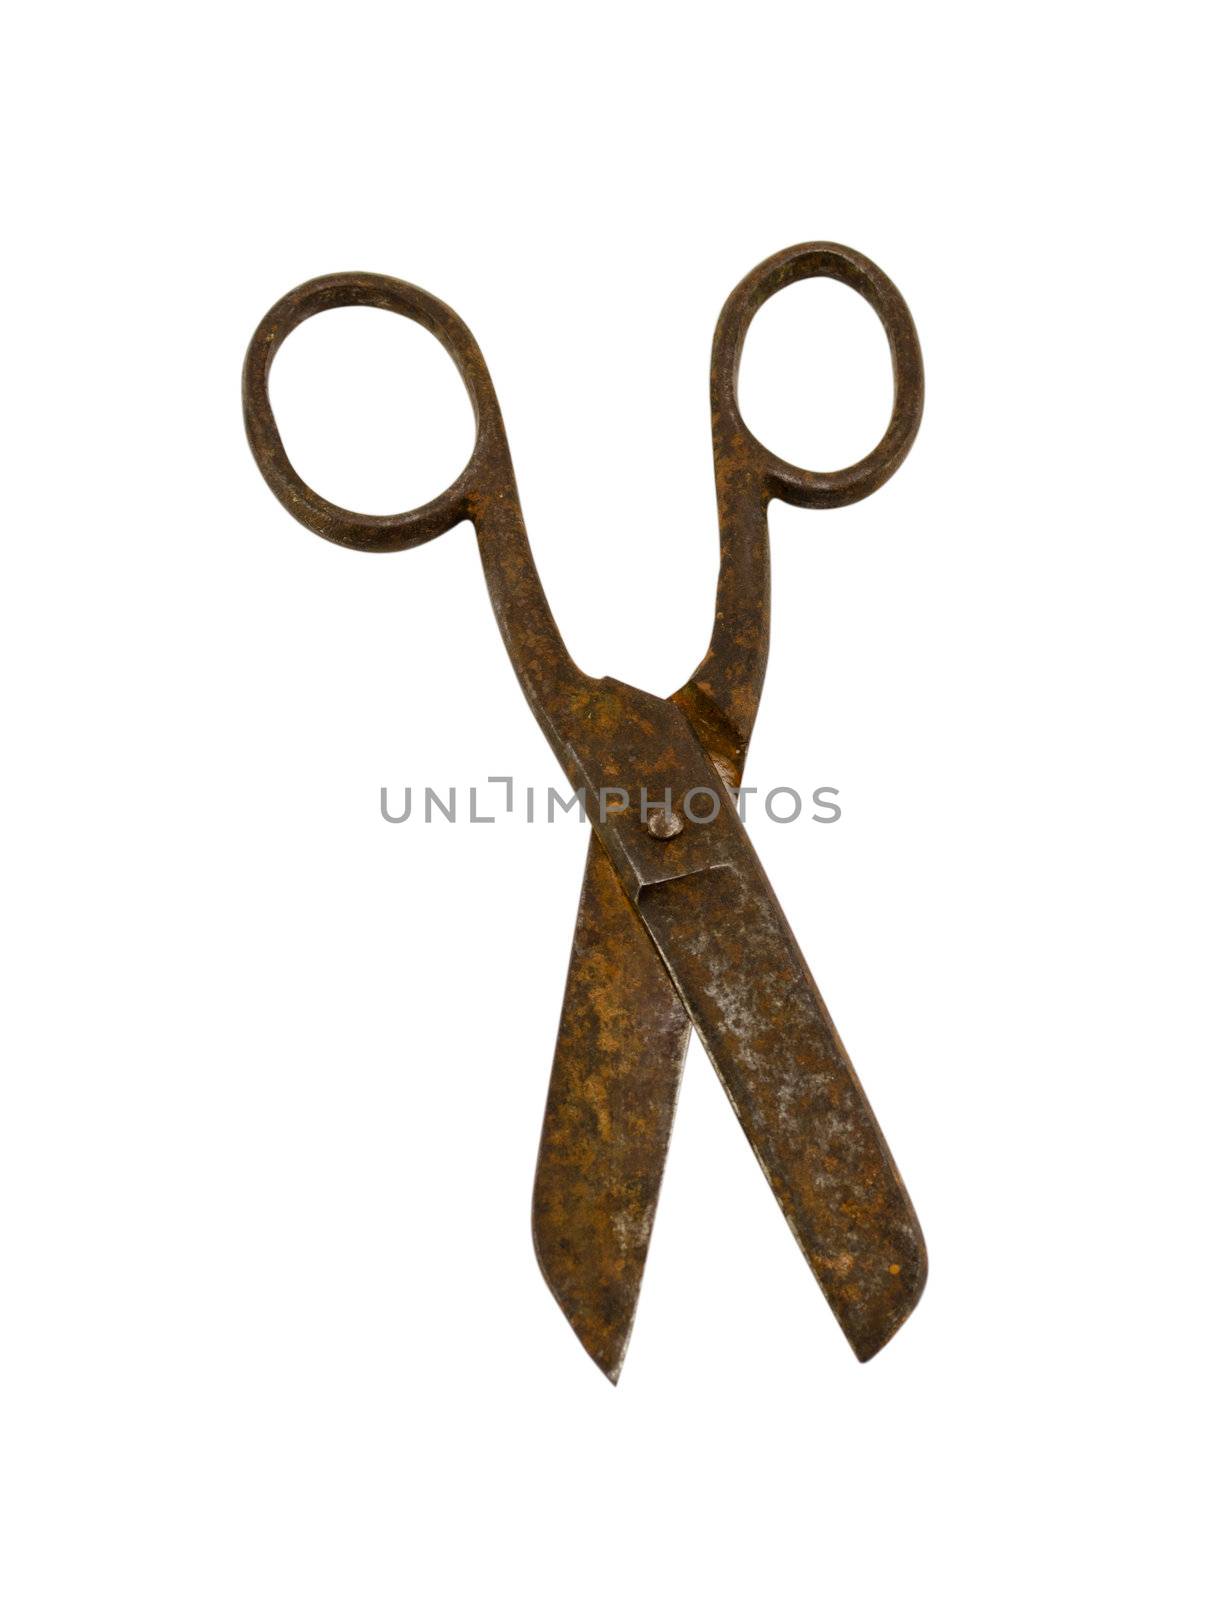 rusty old retro scissors isolated on white background.